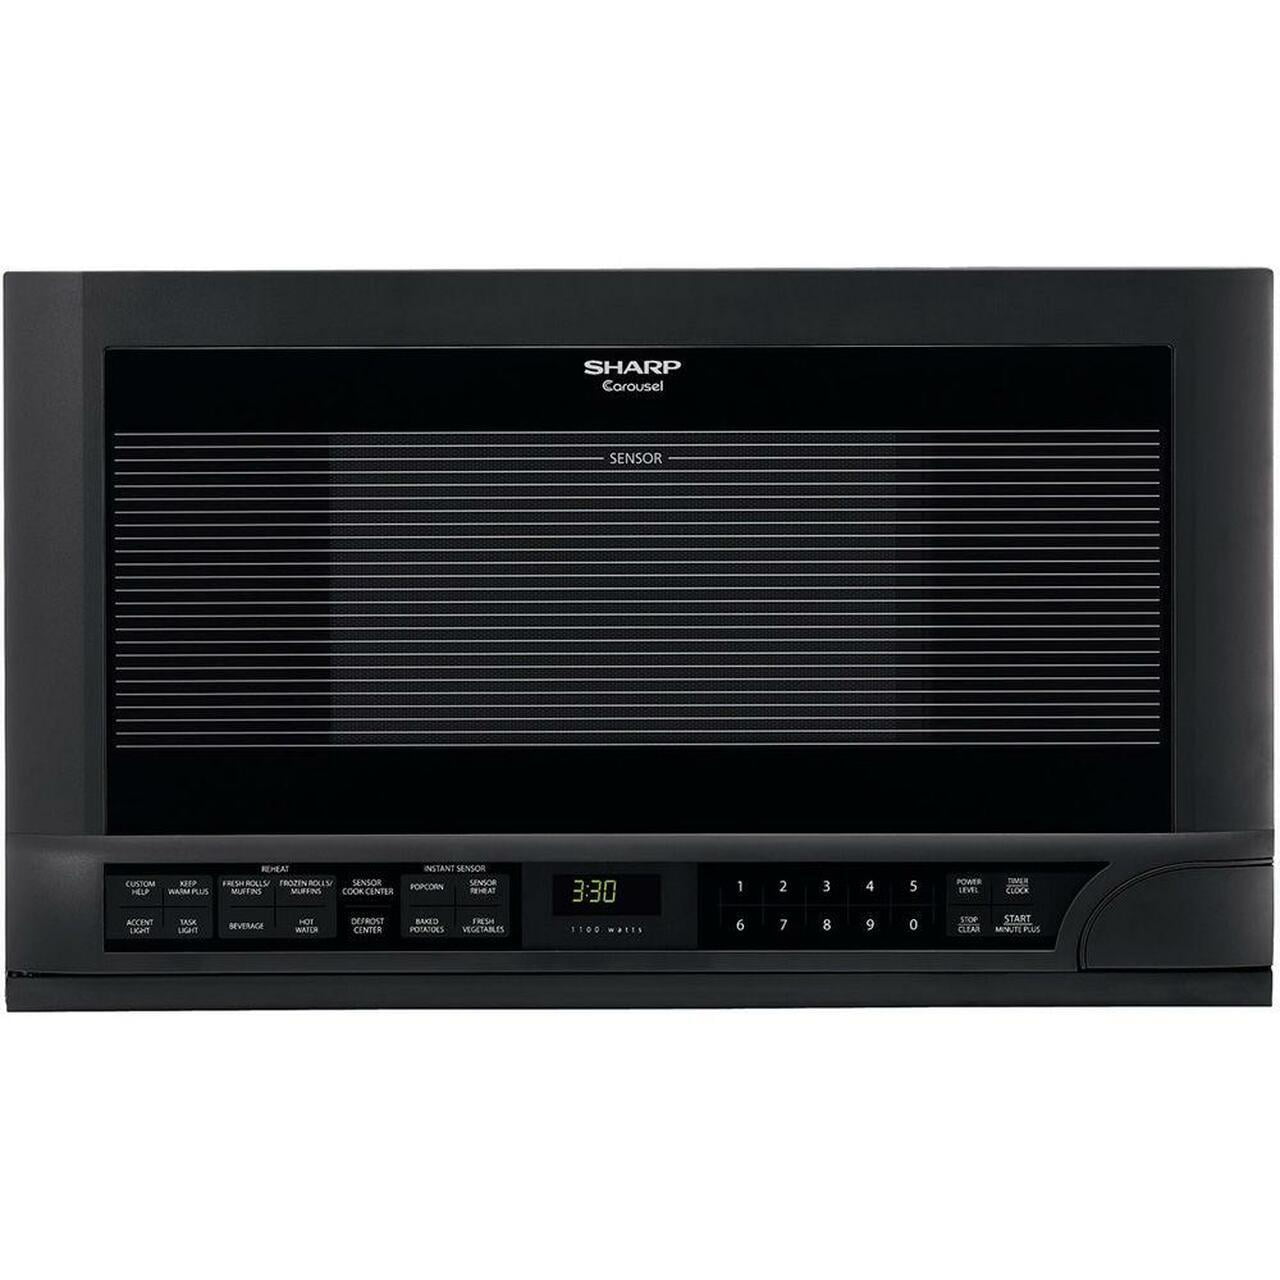 Sharp R1210TY 1.5 Cu. Ft. 1100W Black Sharp Over-The-Counter Carousel Microwave Oven